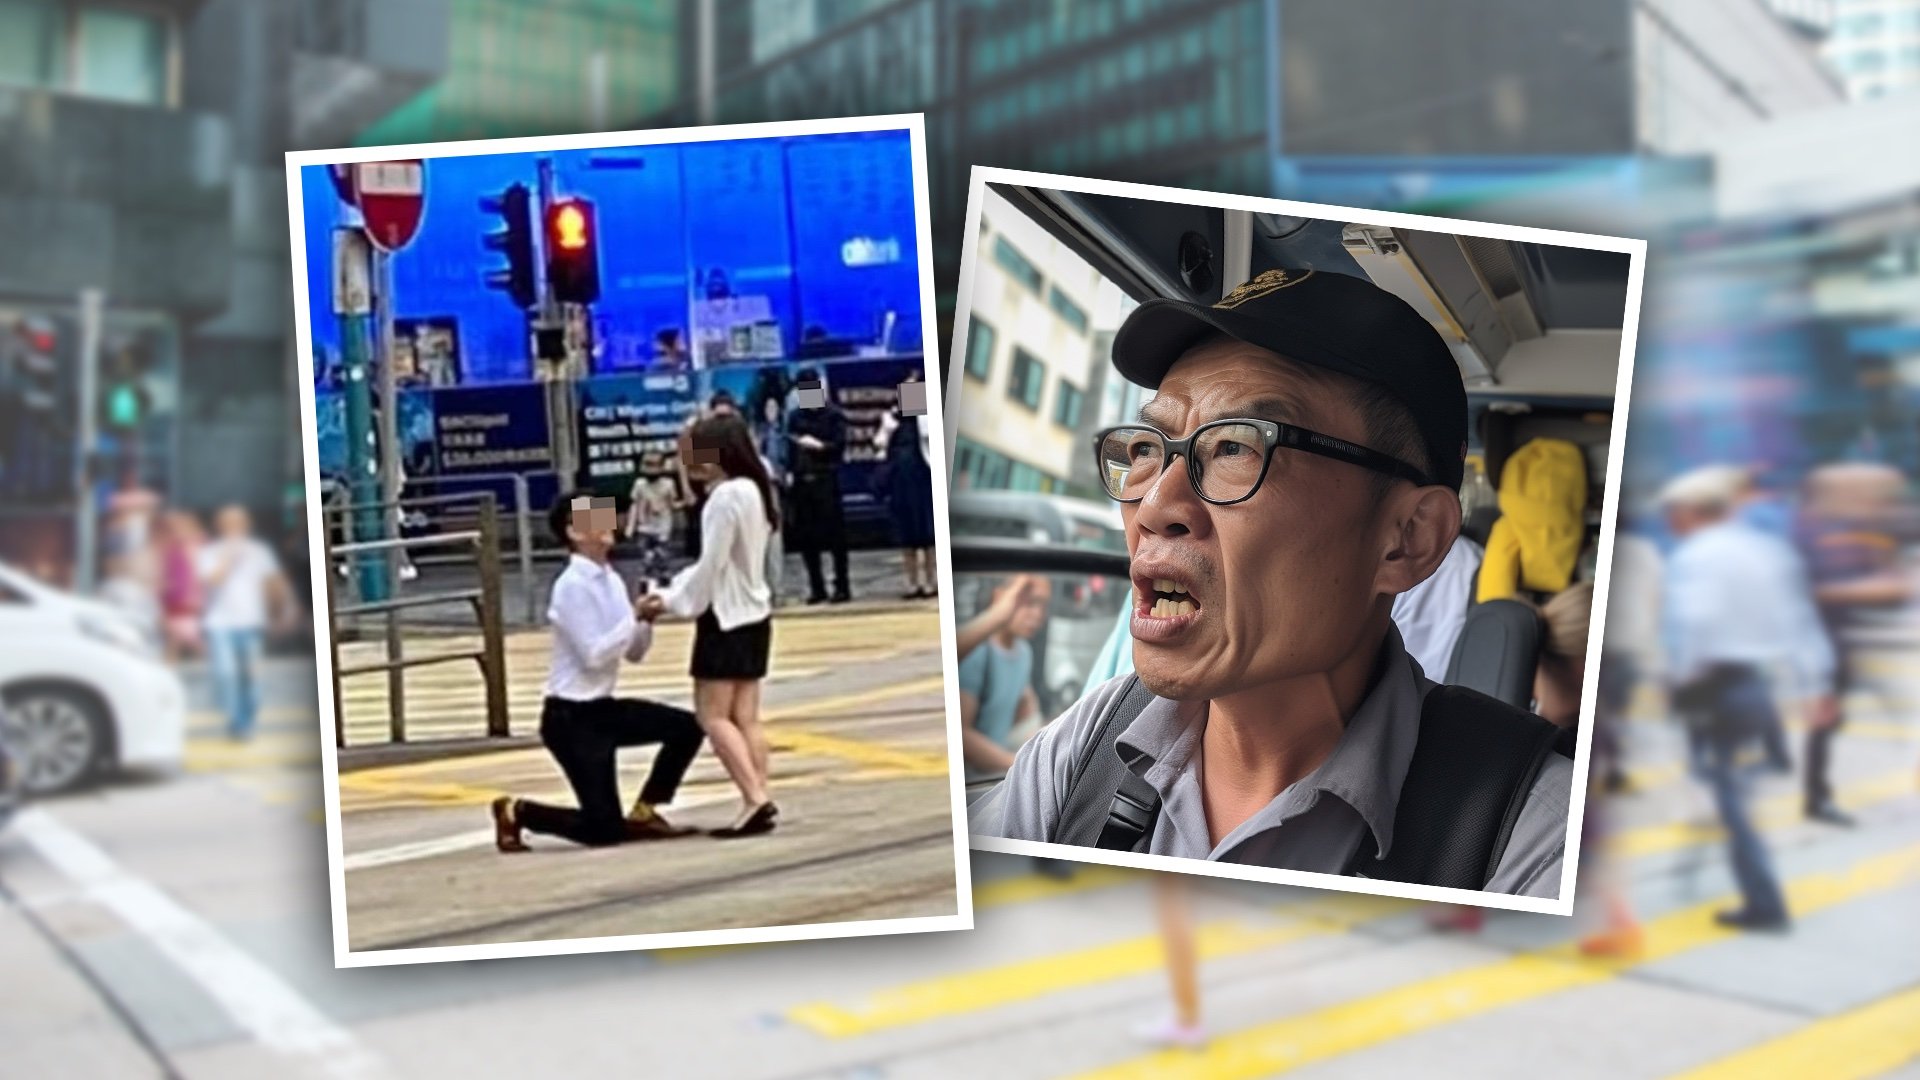 Social media observers have reacted with anger to a Hong Kong man who staged a “romantic” marriage proposal in the middle of a busy street in the heart of the city. Photo: SCMP composite/Facebook